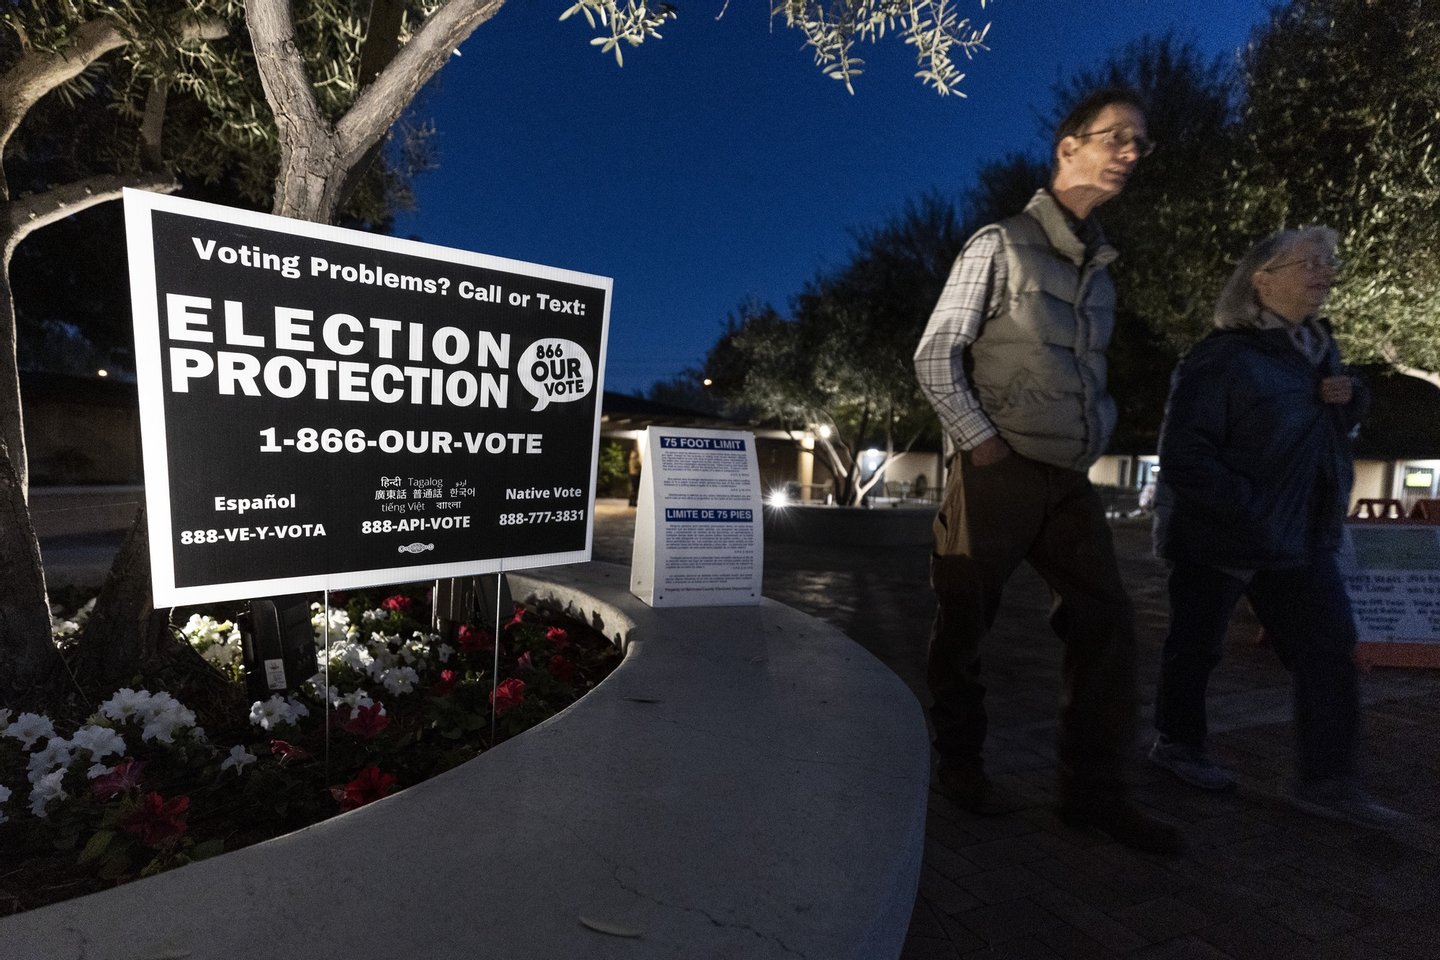 epa10293914 Voters walk past a sign reading ‘Election Protection’ after casting their ballots at the Dayspring United Methodist Church in Tempe, Arizona, USA, 08 November 2022. The US midterm elections are held every four years at the midpoint of each presidential term and this year include elections for all 435 seats in the House of Representatives, 35 of the 100 seats in the Senate and 36 of the 50 state governors as well as numerous other local seats and ballot issues. EPA/ETIENNE LAURENT